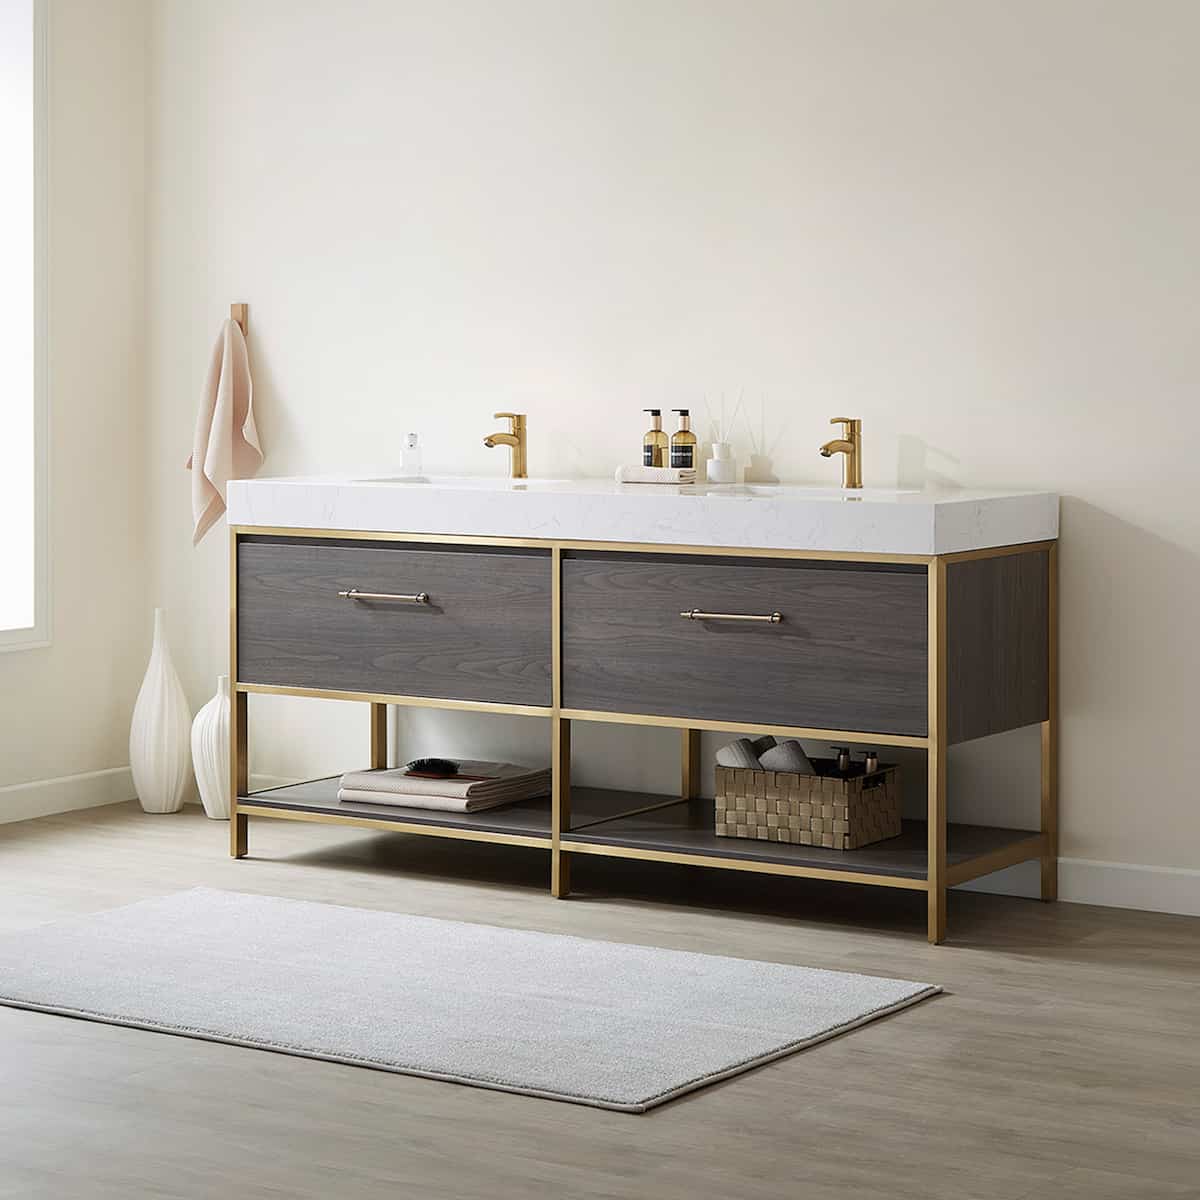 Vinnova Palma 72 Inch Freestanding Double Sink Bath Vanity in Suleiman Oak with White Composite Grain Stone Without Mirror Side 701272G-SO-GW-NM